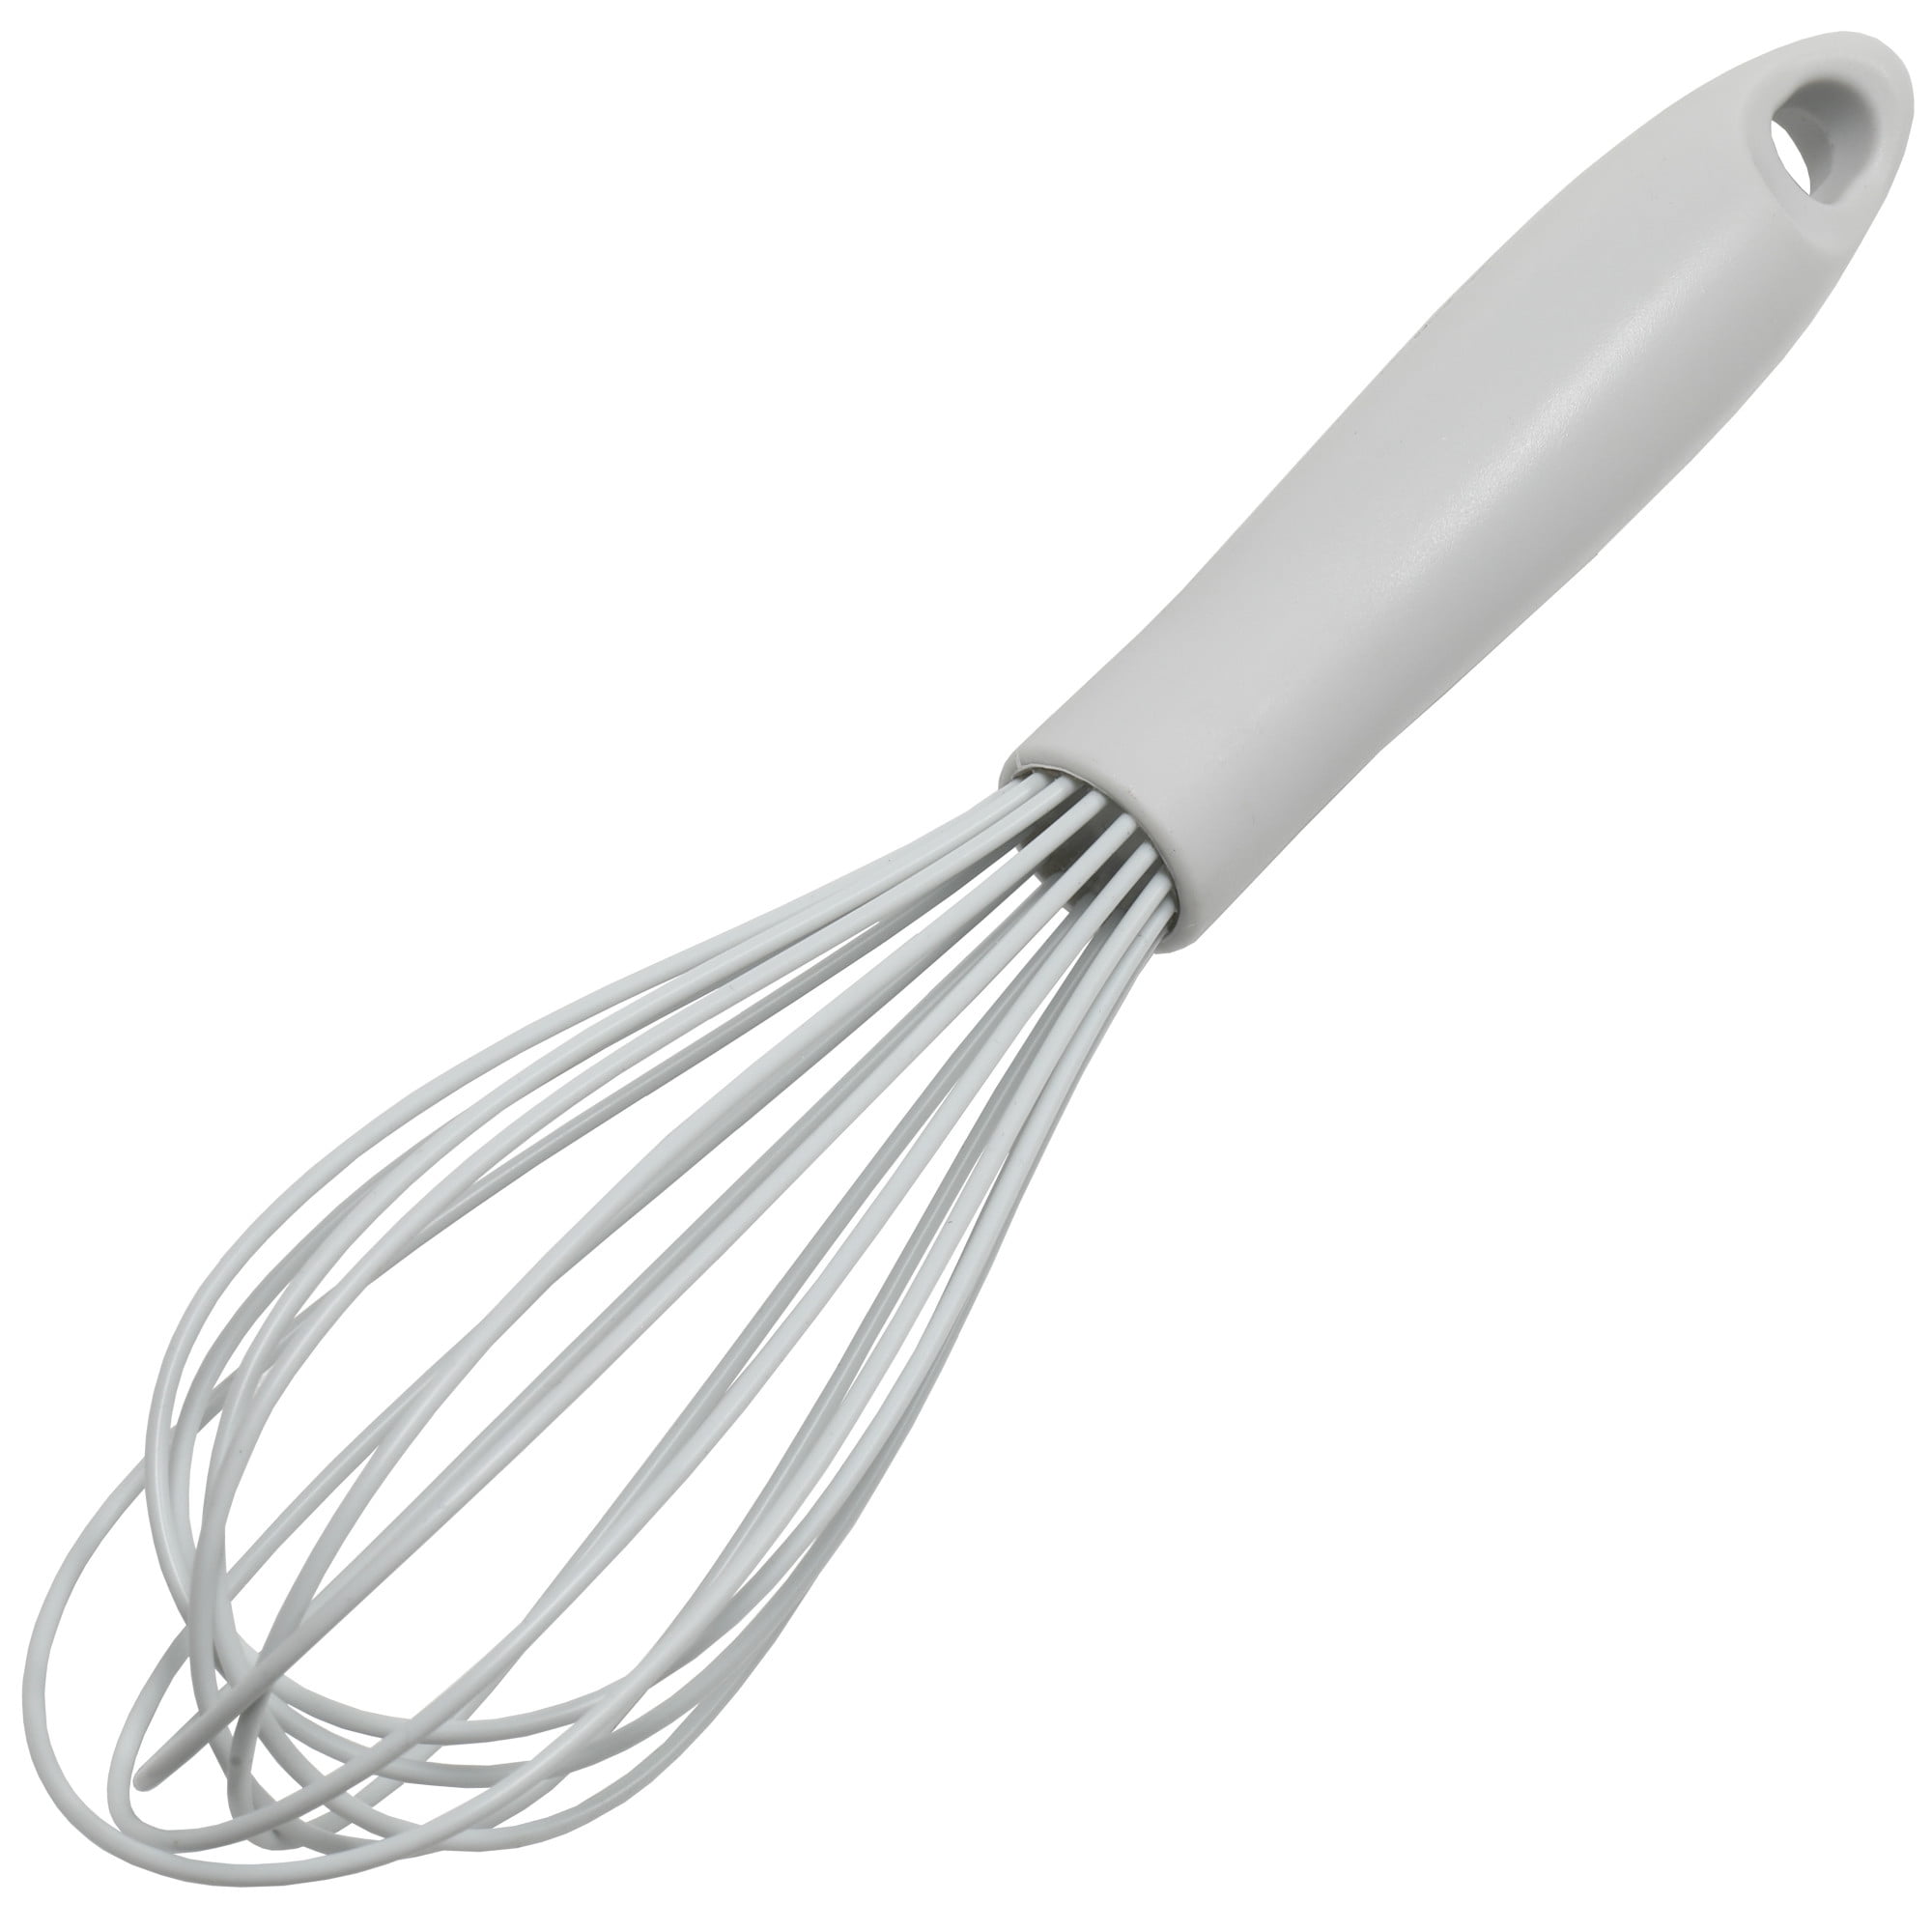  Flat Whisk Silicone Handle Non Slip 10 - 5 Wires Whisk with 10  Heads for Kitchen Cooking by Jell-Cell (Green): Home & Kitchen